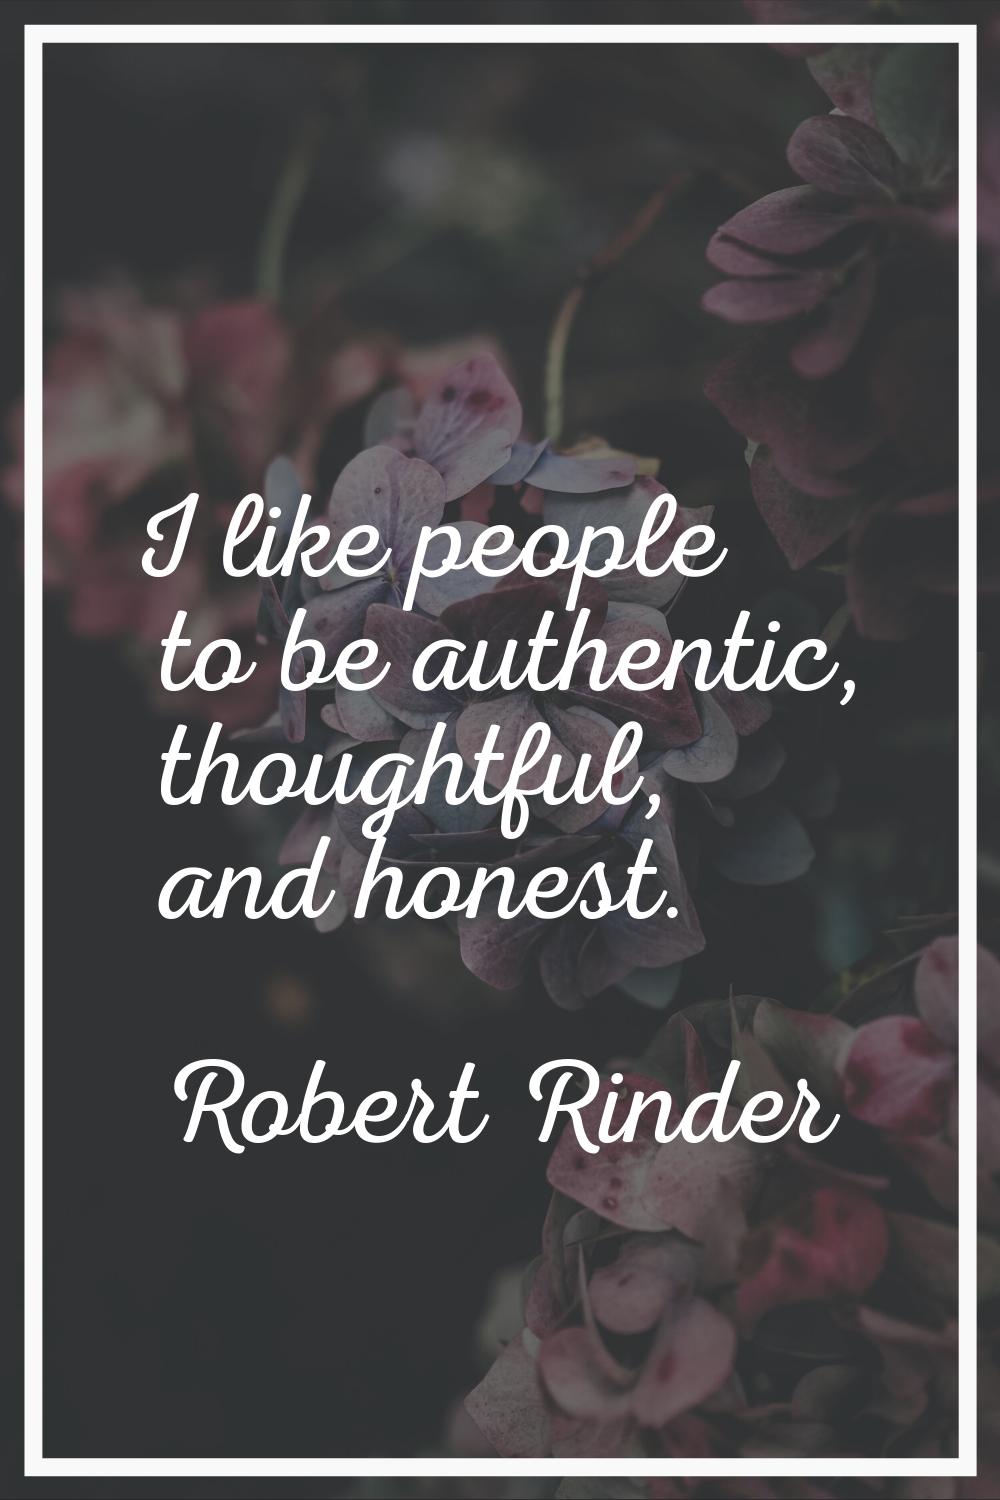 I like people to be authentic, thoughtful, and honest.